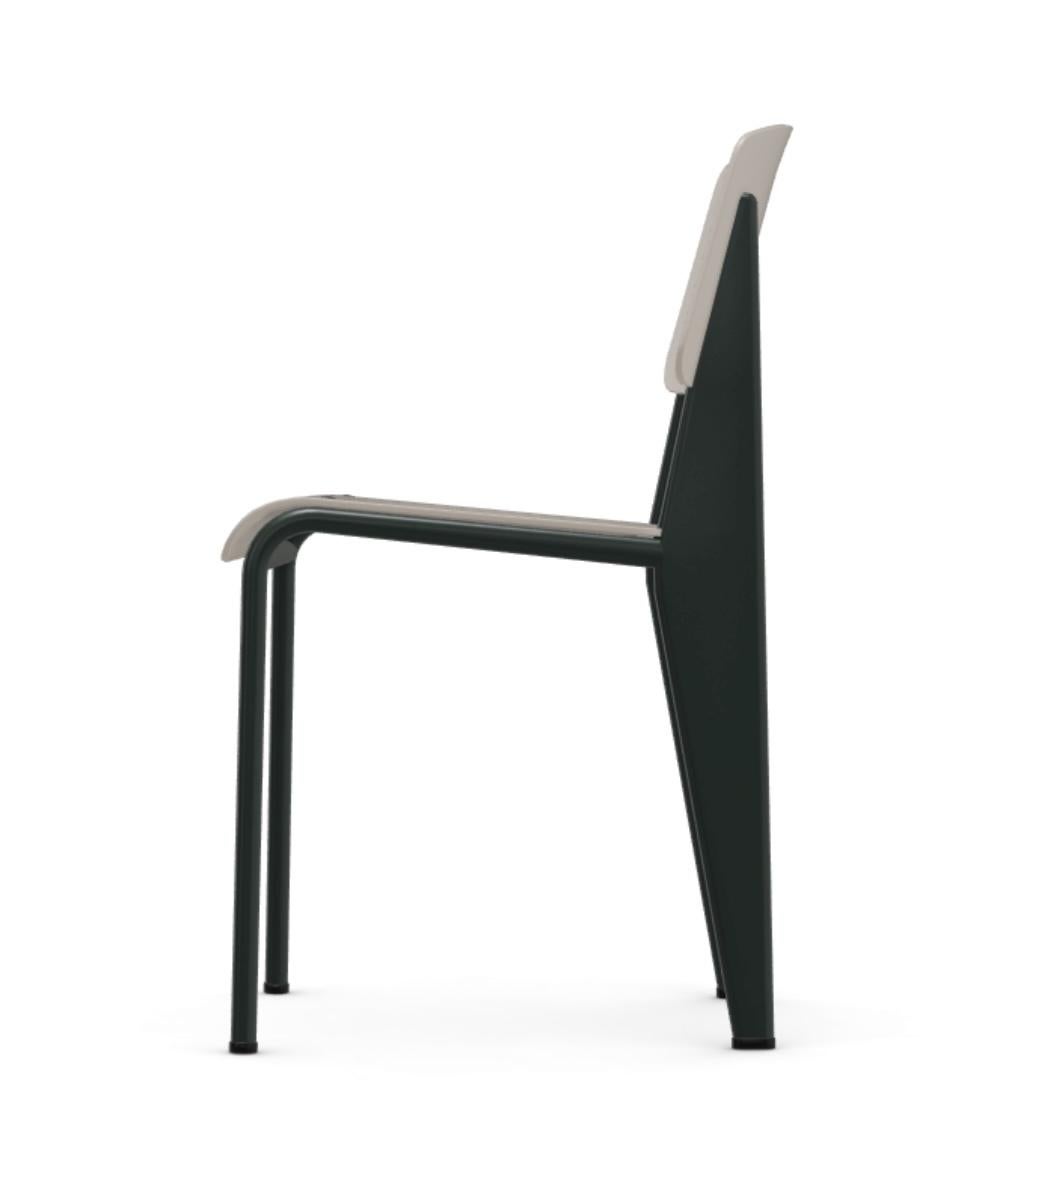 Mid-Century Modern Standard SP Chair in Basalt and Warm Gray by Jean Prouvé for Vitra